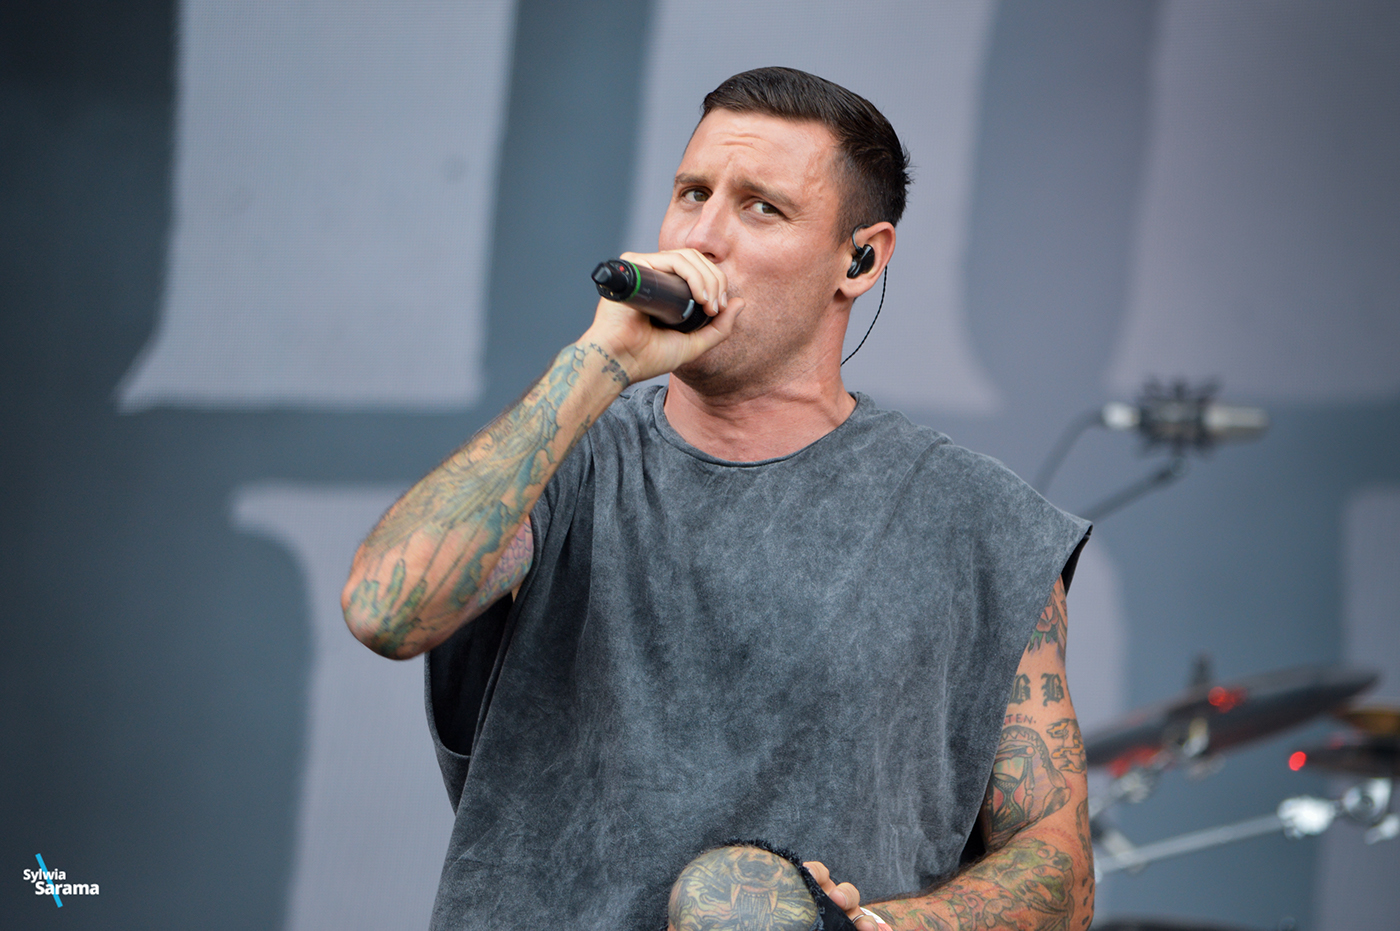 parkway drive live music concert sziget festival hungary budapest